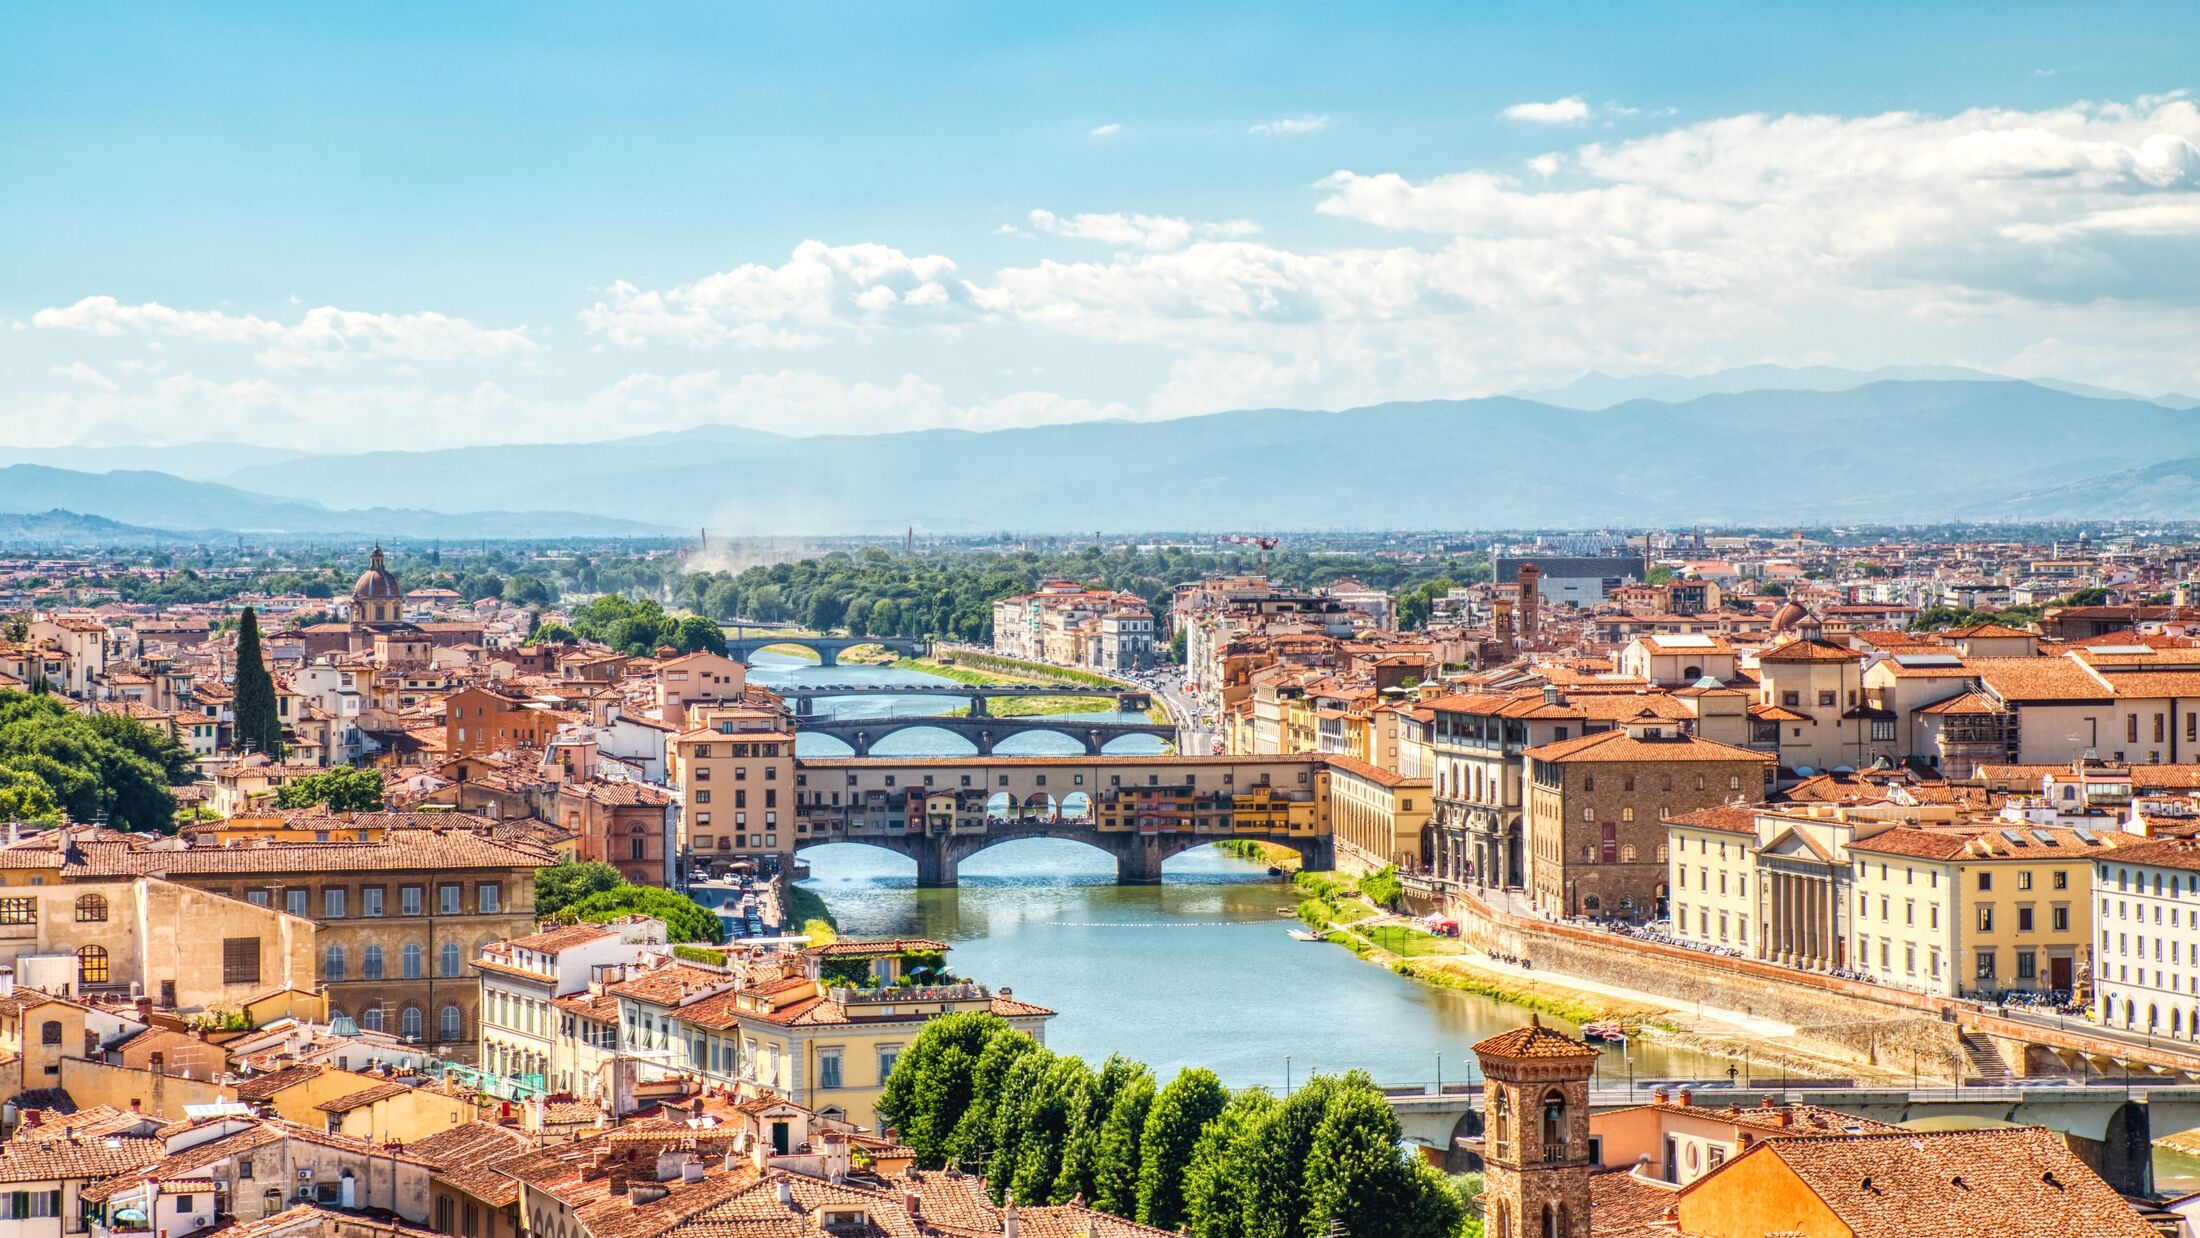 Florence Aerial View of Ponte Vecchio Bridge during Beautiful Sunny Day, Italy